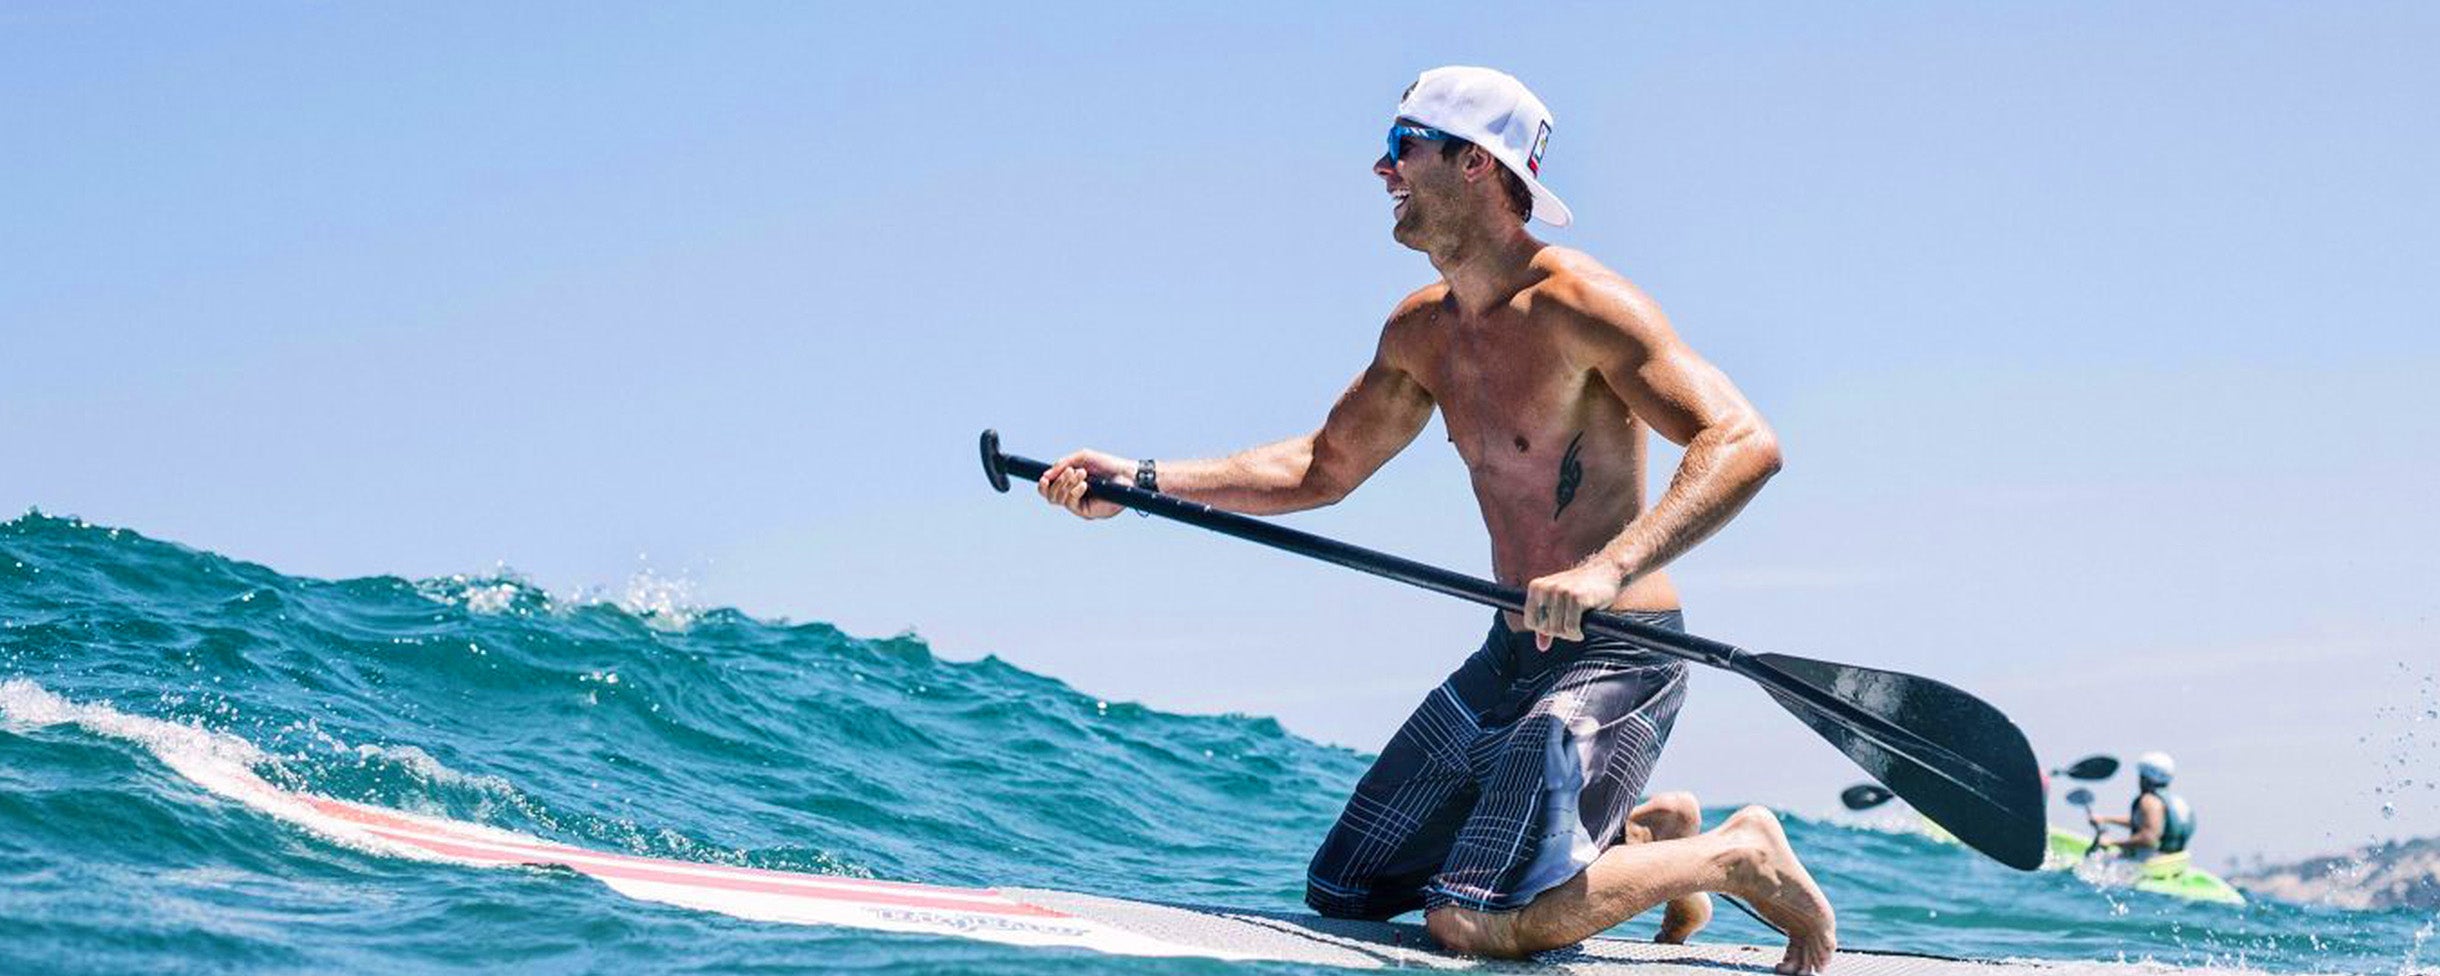 Rentals - Stand-up Paddleboard Rentals. Everyday California offers paddleboard rentals and lessons in La Jolla, California